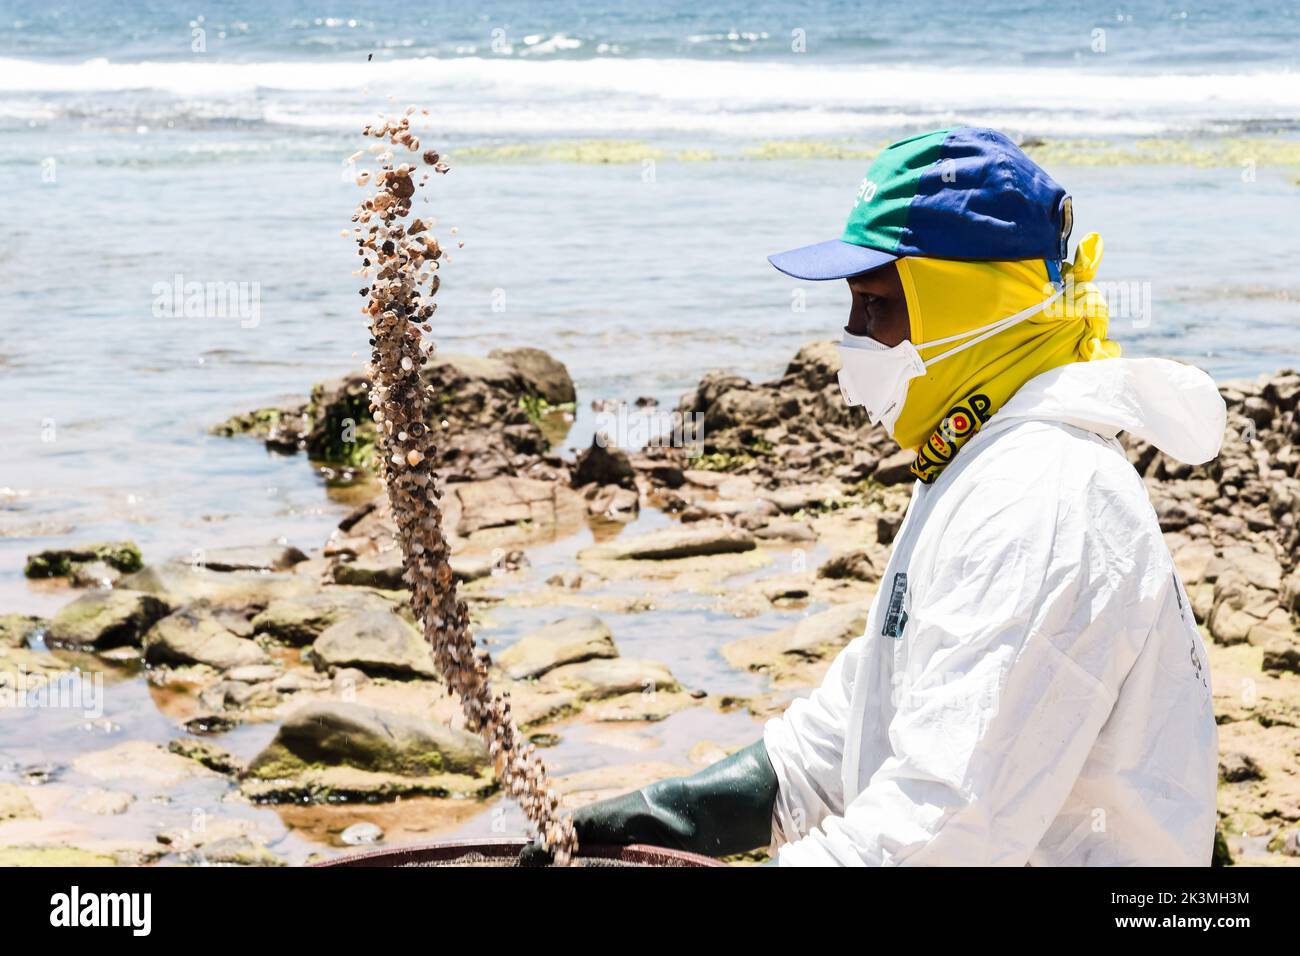 Salvador, Bahia, Brazil - October 26, 2019: Cleaning agents extract oil from Pedra do Sal beach in the city of Salvador. The site was affected by an o Stock Photo